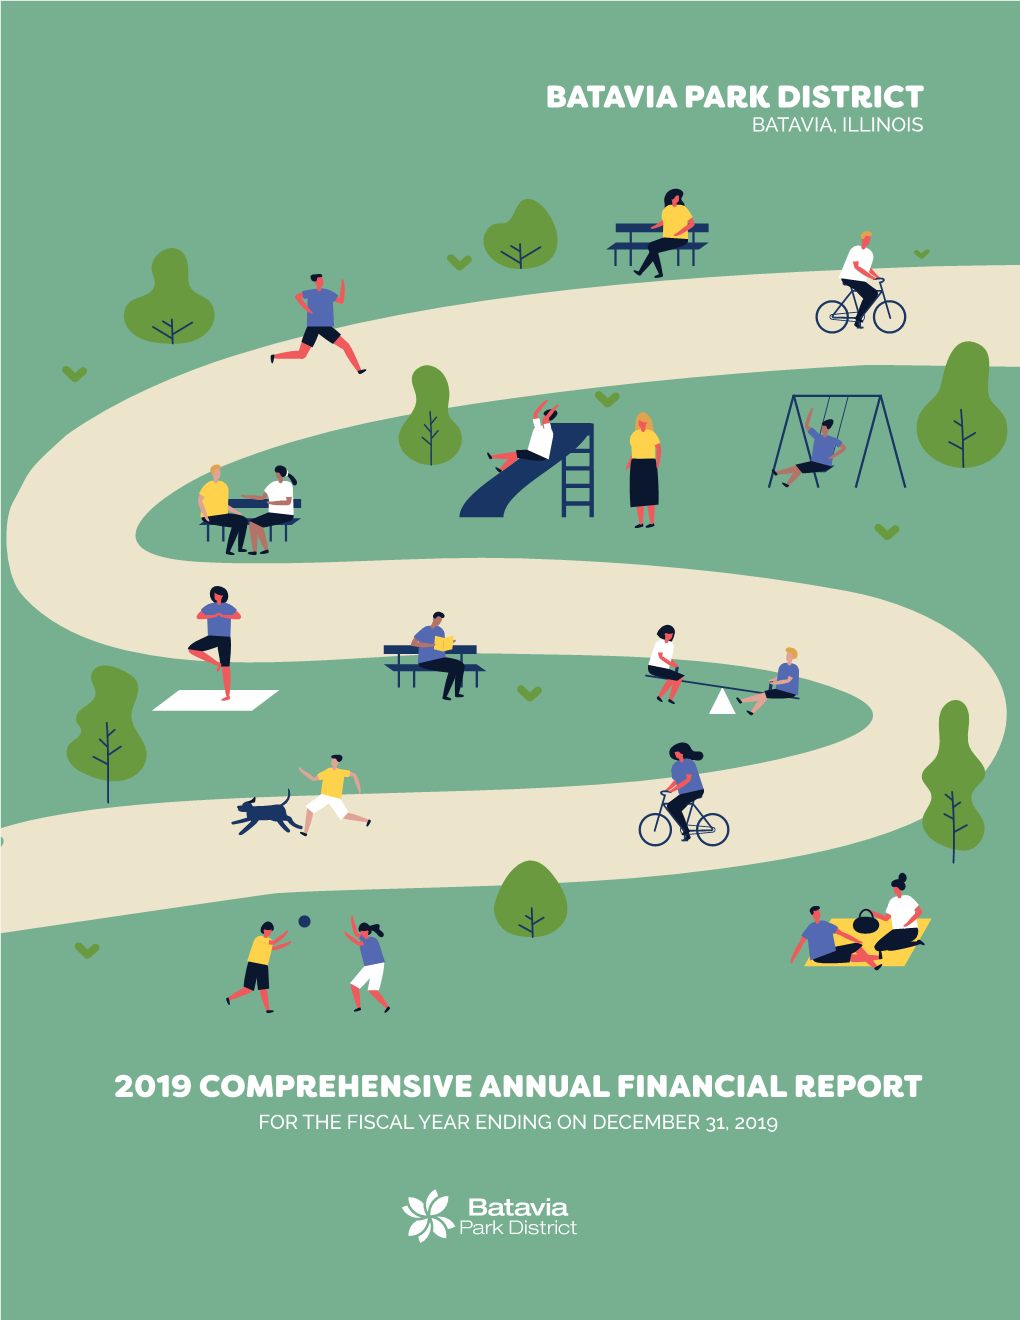 2019 Comprehensive Annual Financial Report for the Fiscal Year Ending on December 31, 2019